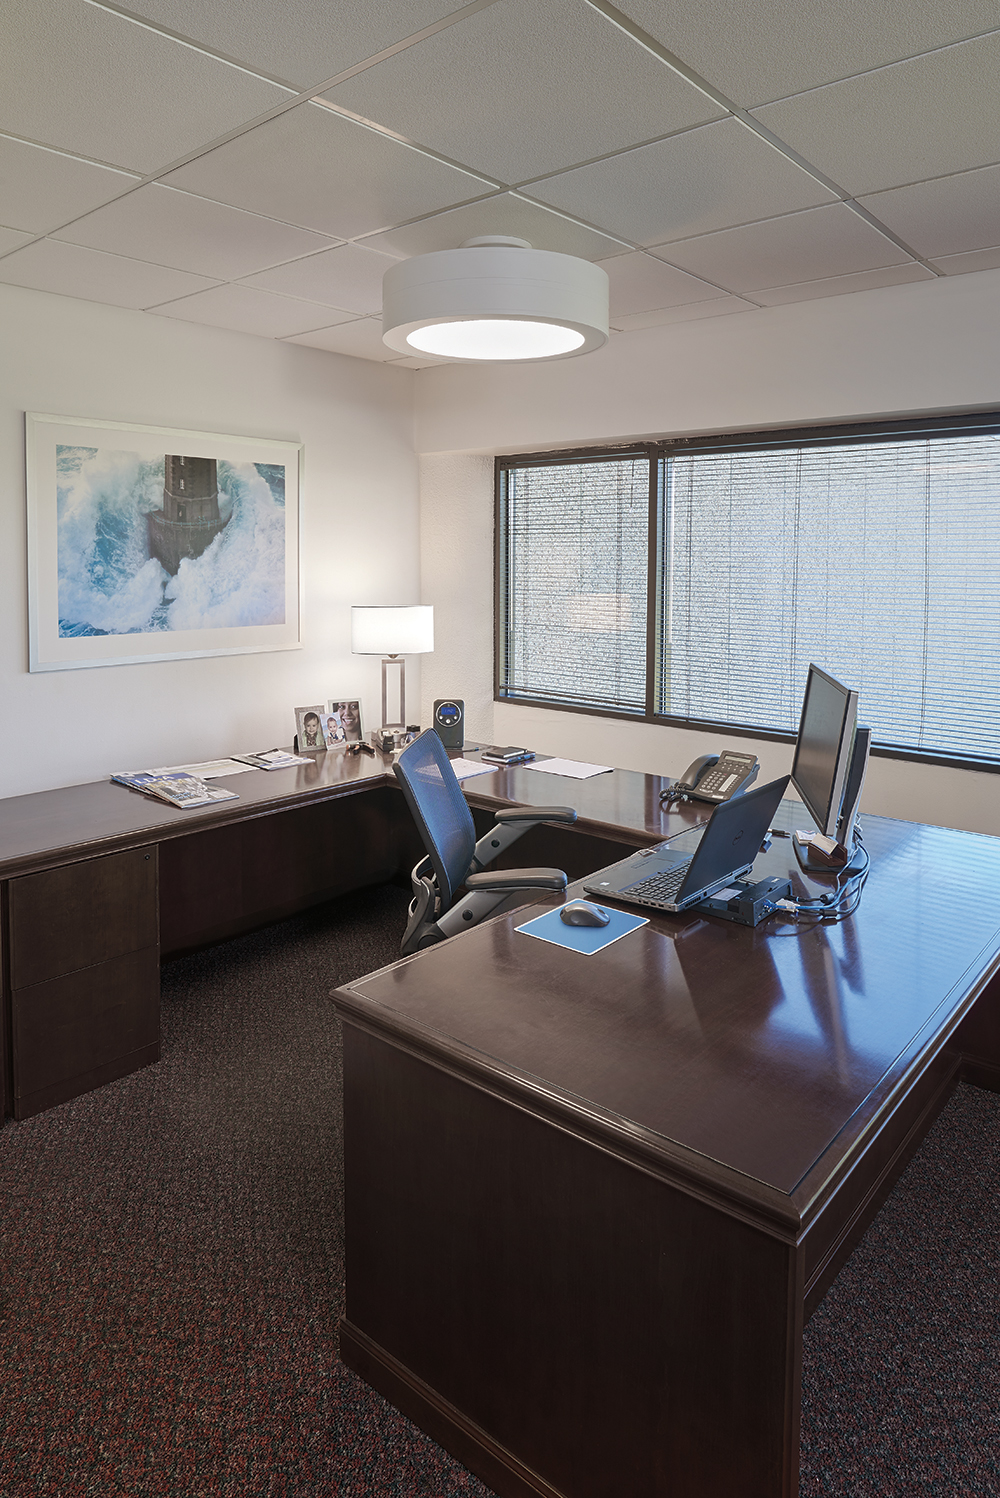 Omnience office lighting fixtures above a desk in a modern private office design.